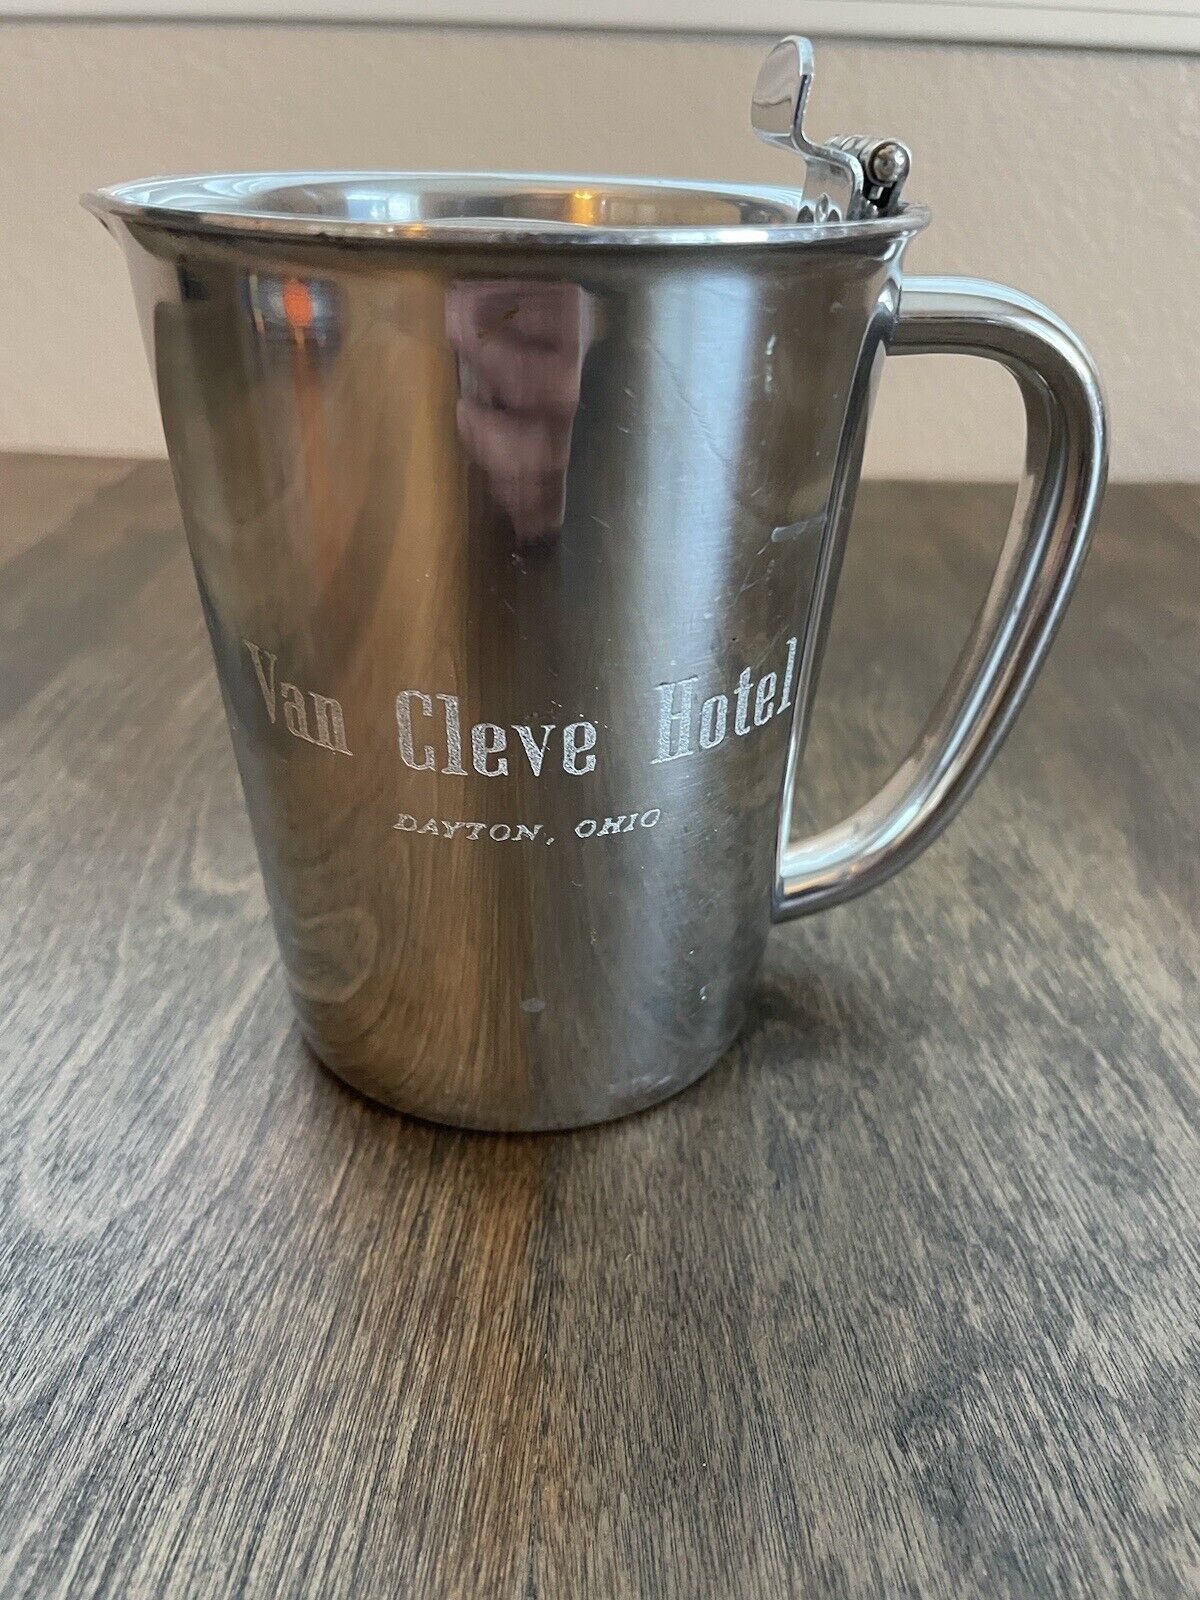 Vintage Rare Landers Frary & Clark Van Cleve Hotel Ohio Hot and Cold Pitcher 8oz